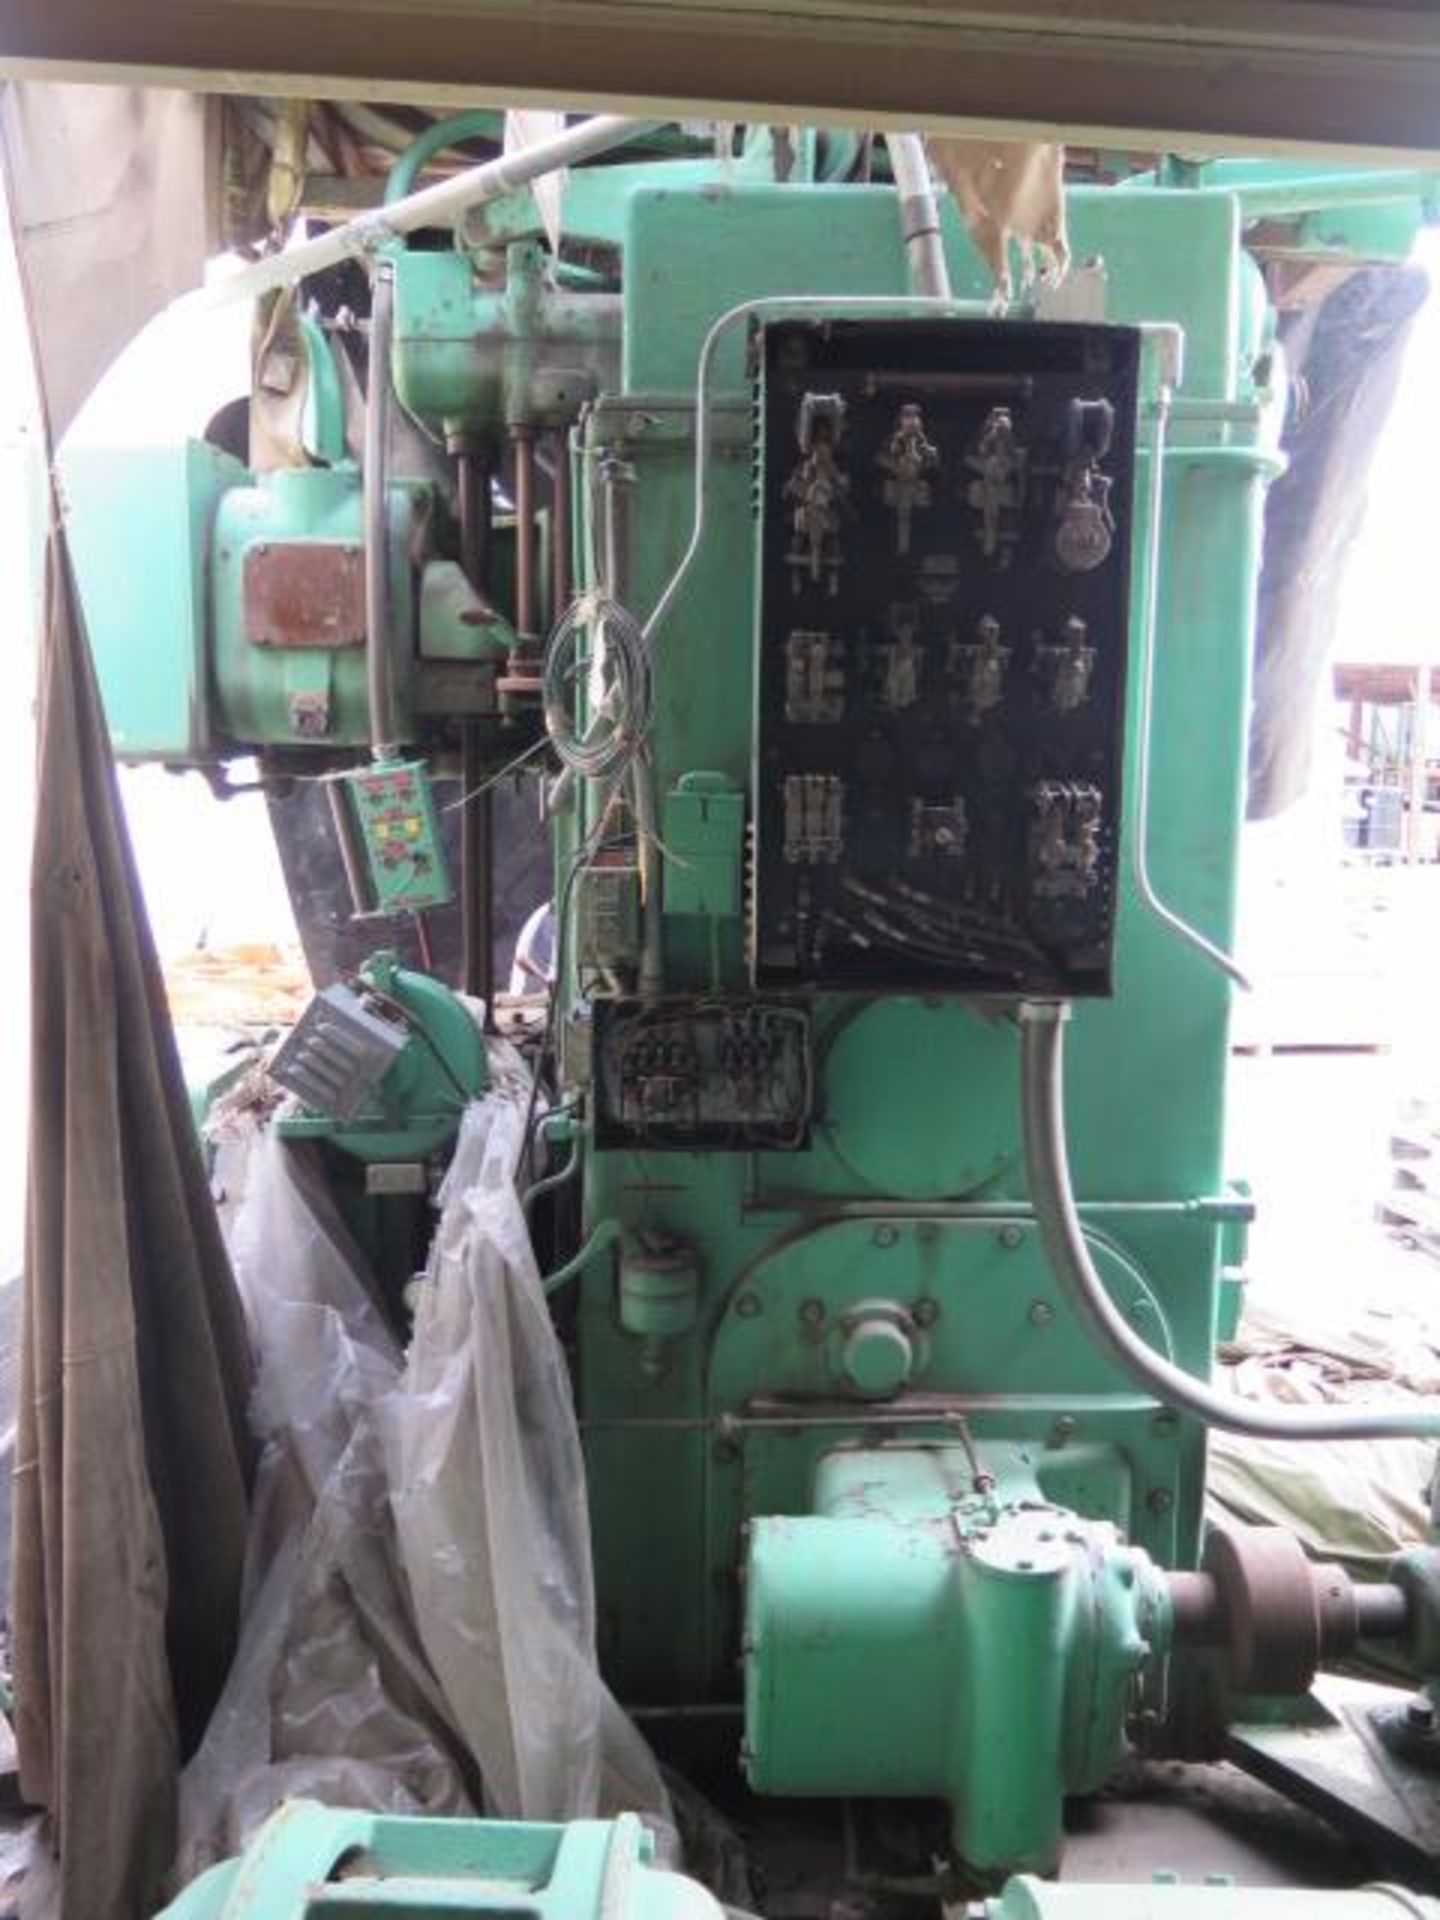 King 36" Vertical Turret Lathe s/n 2615 w/ 5-Station Indexing Head, Facing / Turning Head,SOLD AS IS - Image 12 of 14